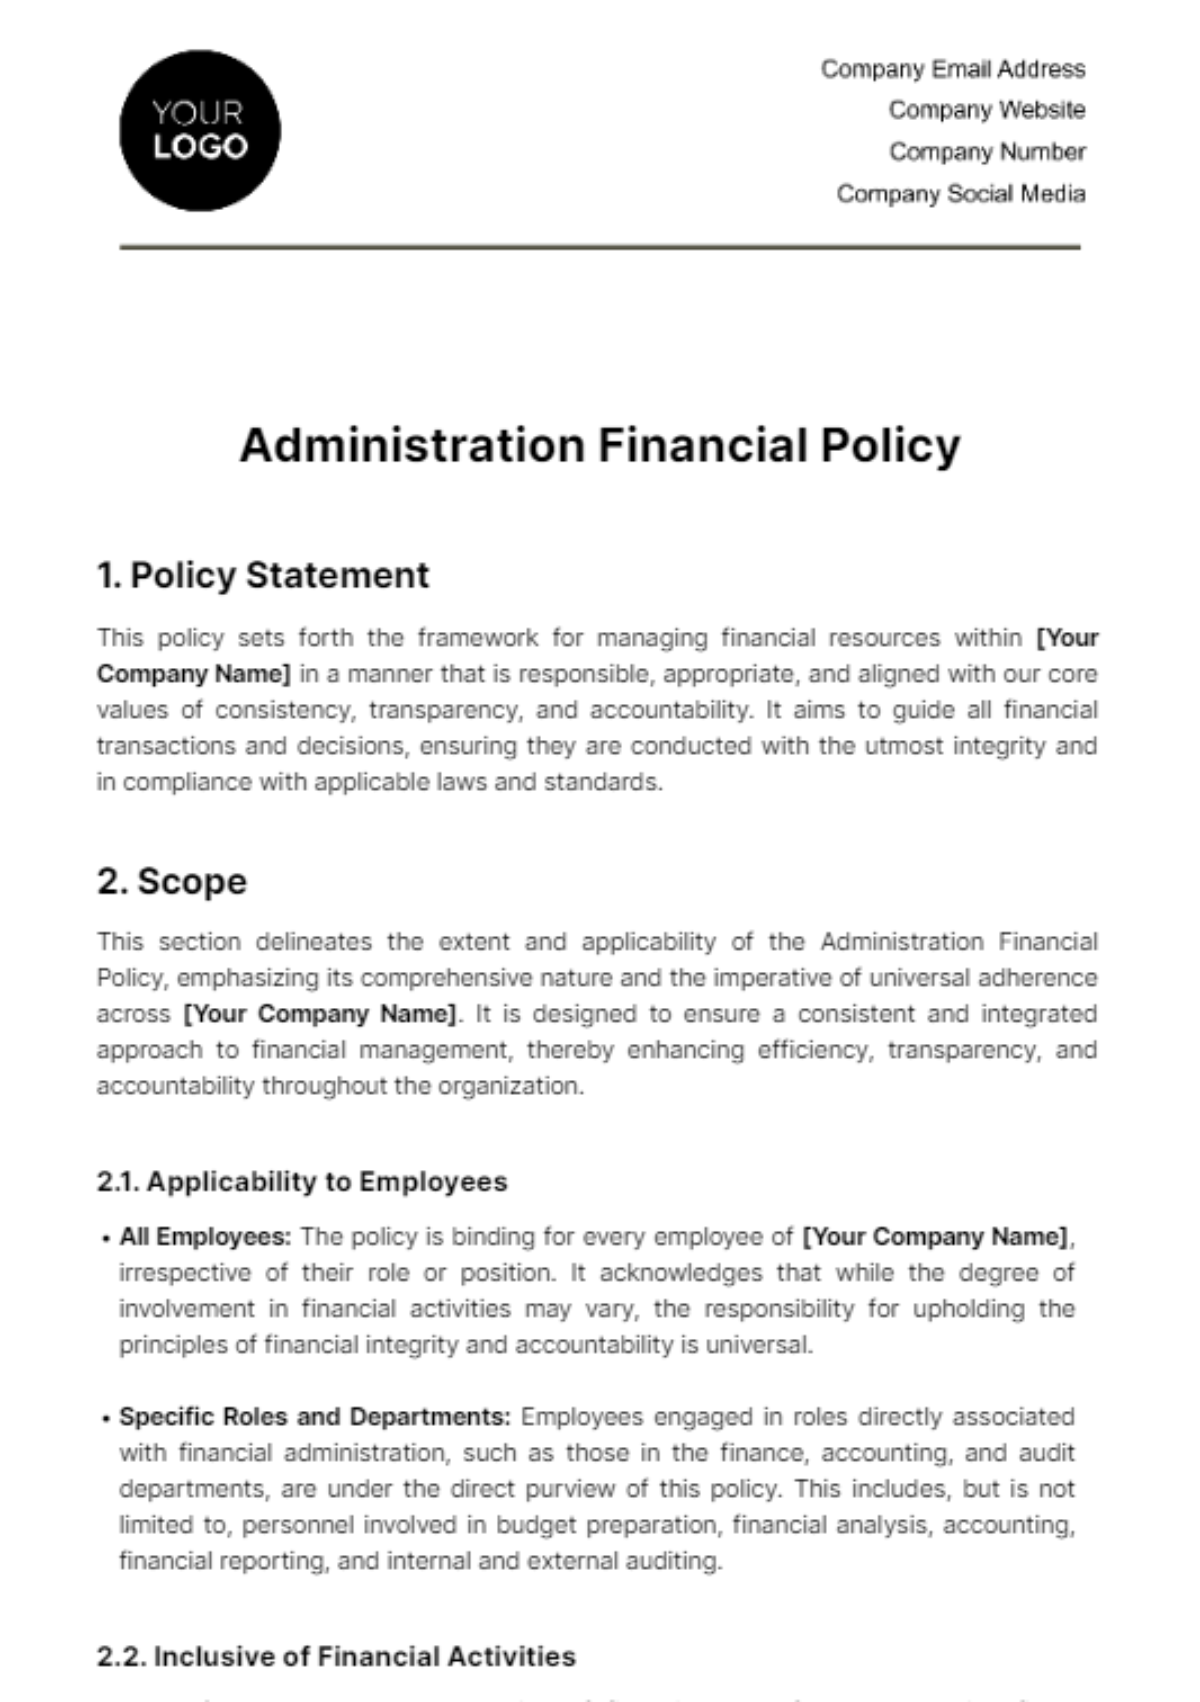 Administration Financial Policy Template